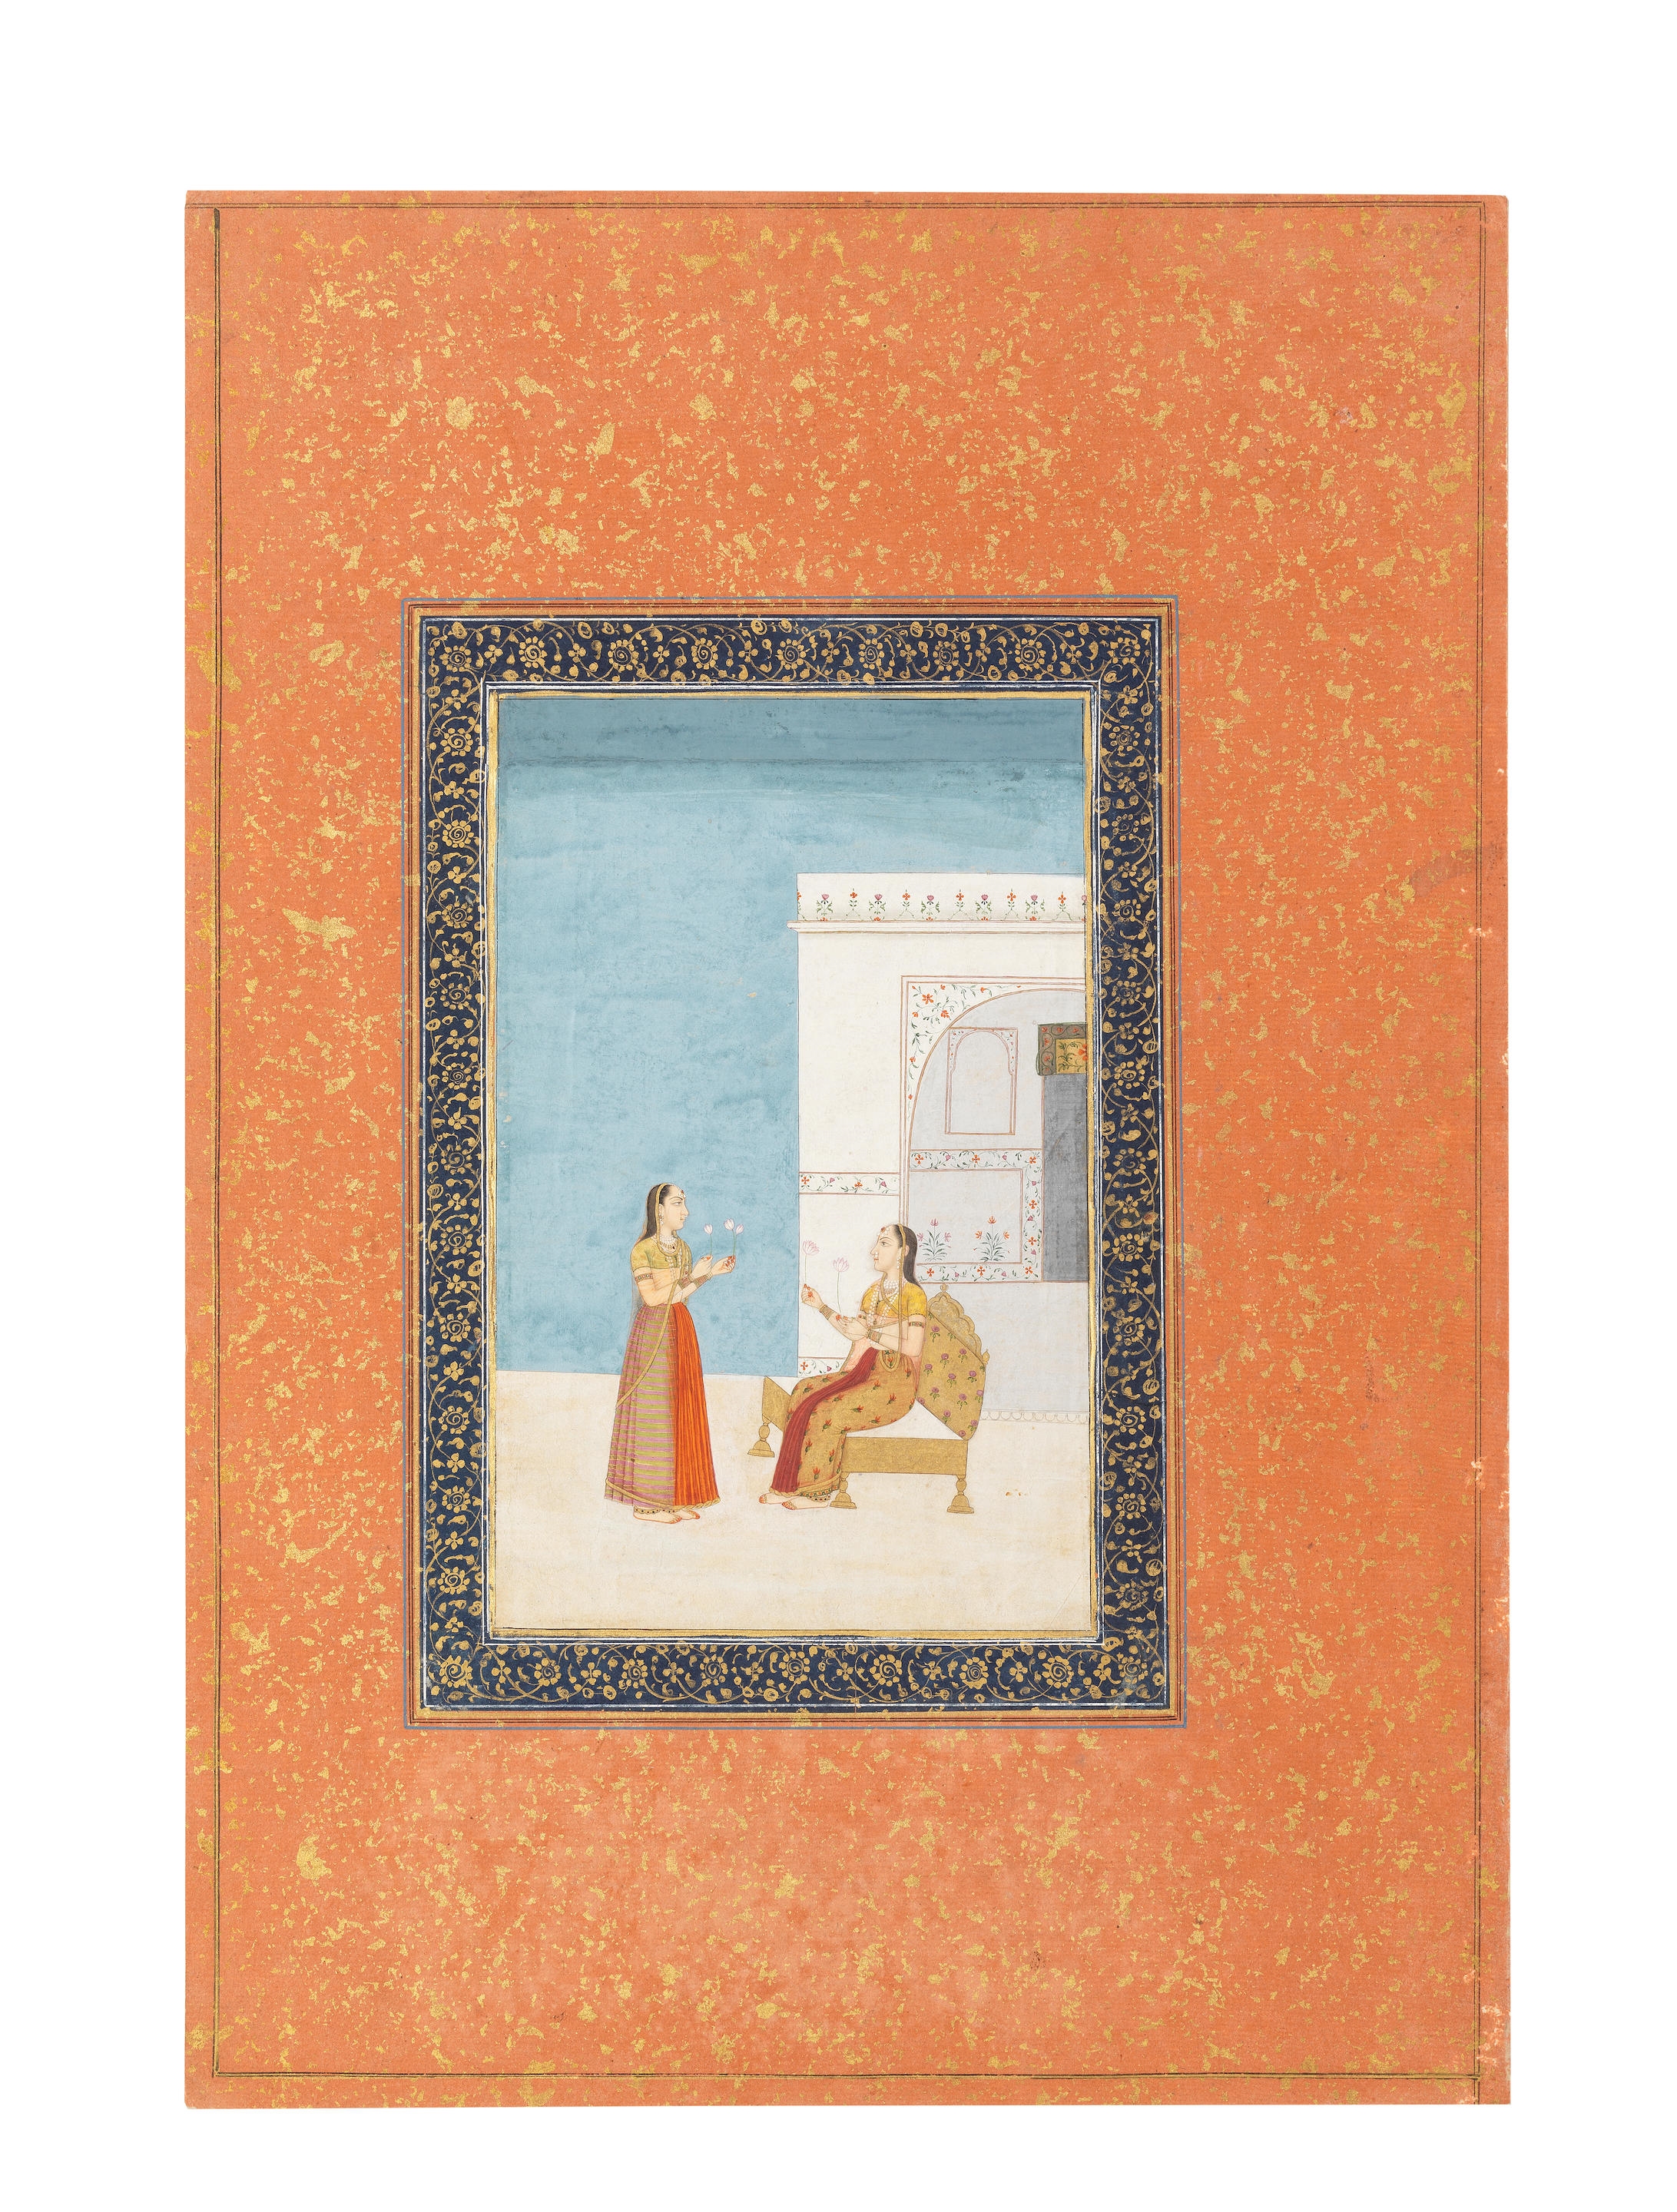 Artwork by Mughal School, 18th Century, Malsri ragini : two maidens in discourse on a terrace, holding long-stemmed lotus flowers, Made of gouache and gold on paper